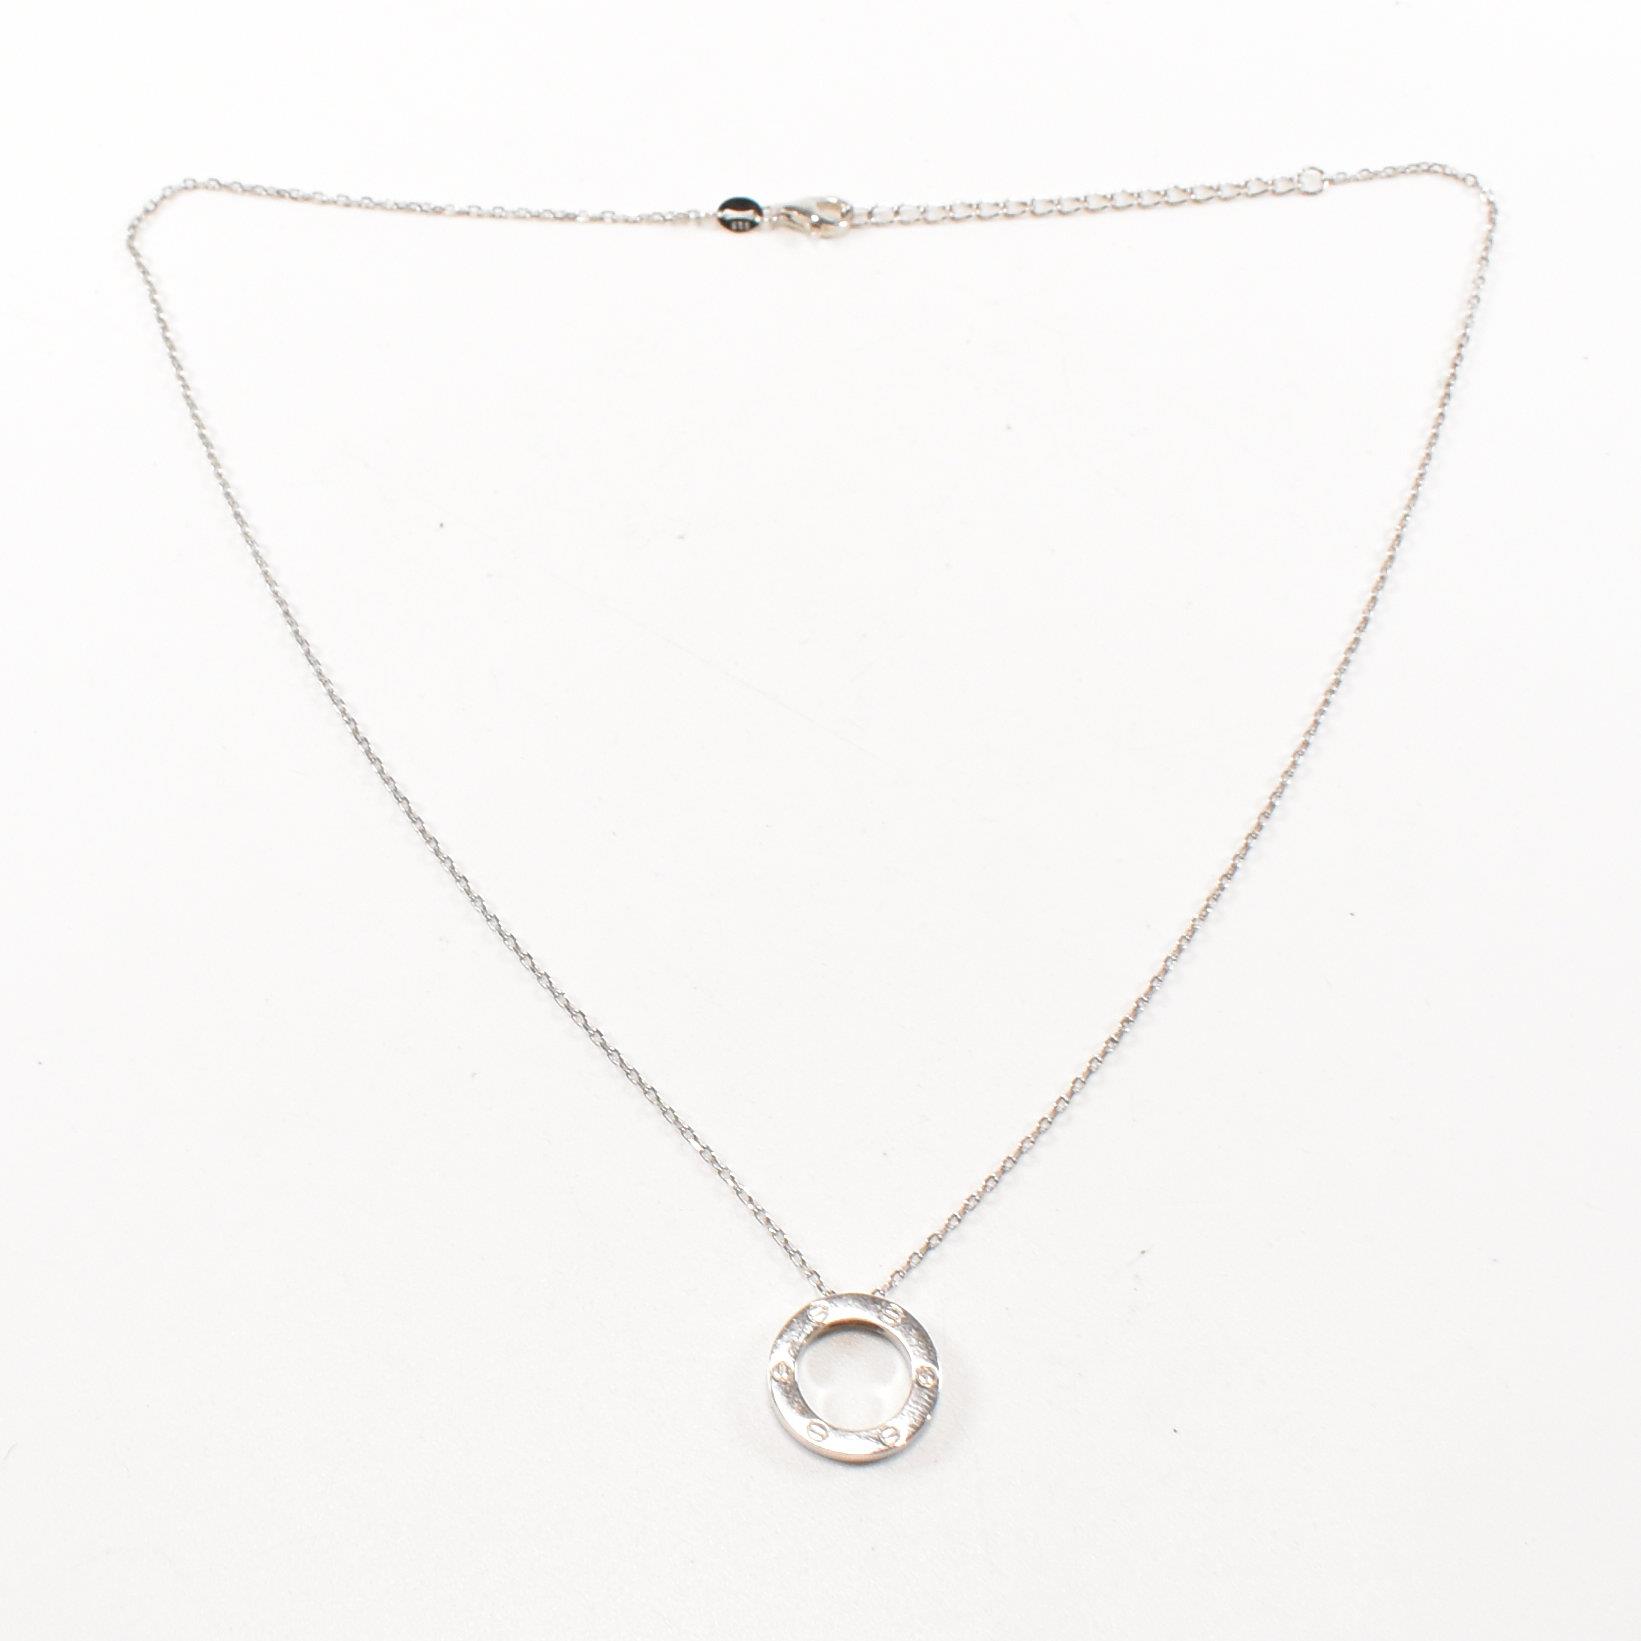 SILVER DESIGNER STYLE PENDANT NECKLACE - Image 4 of 7